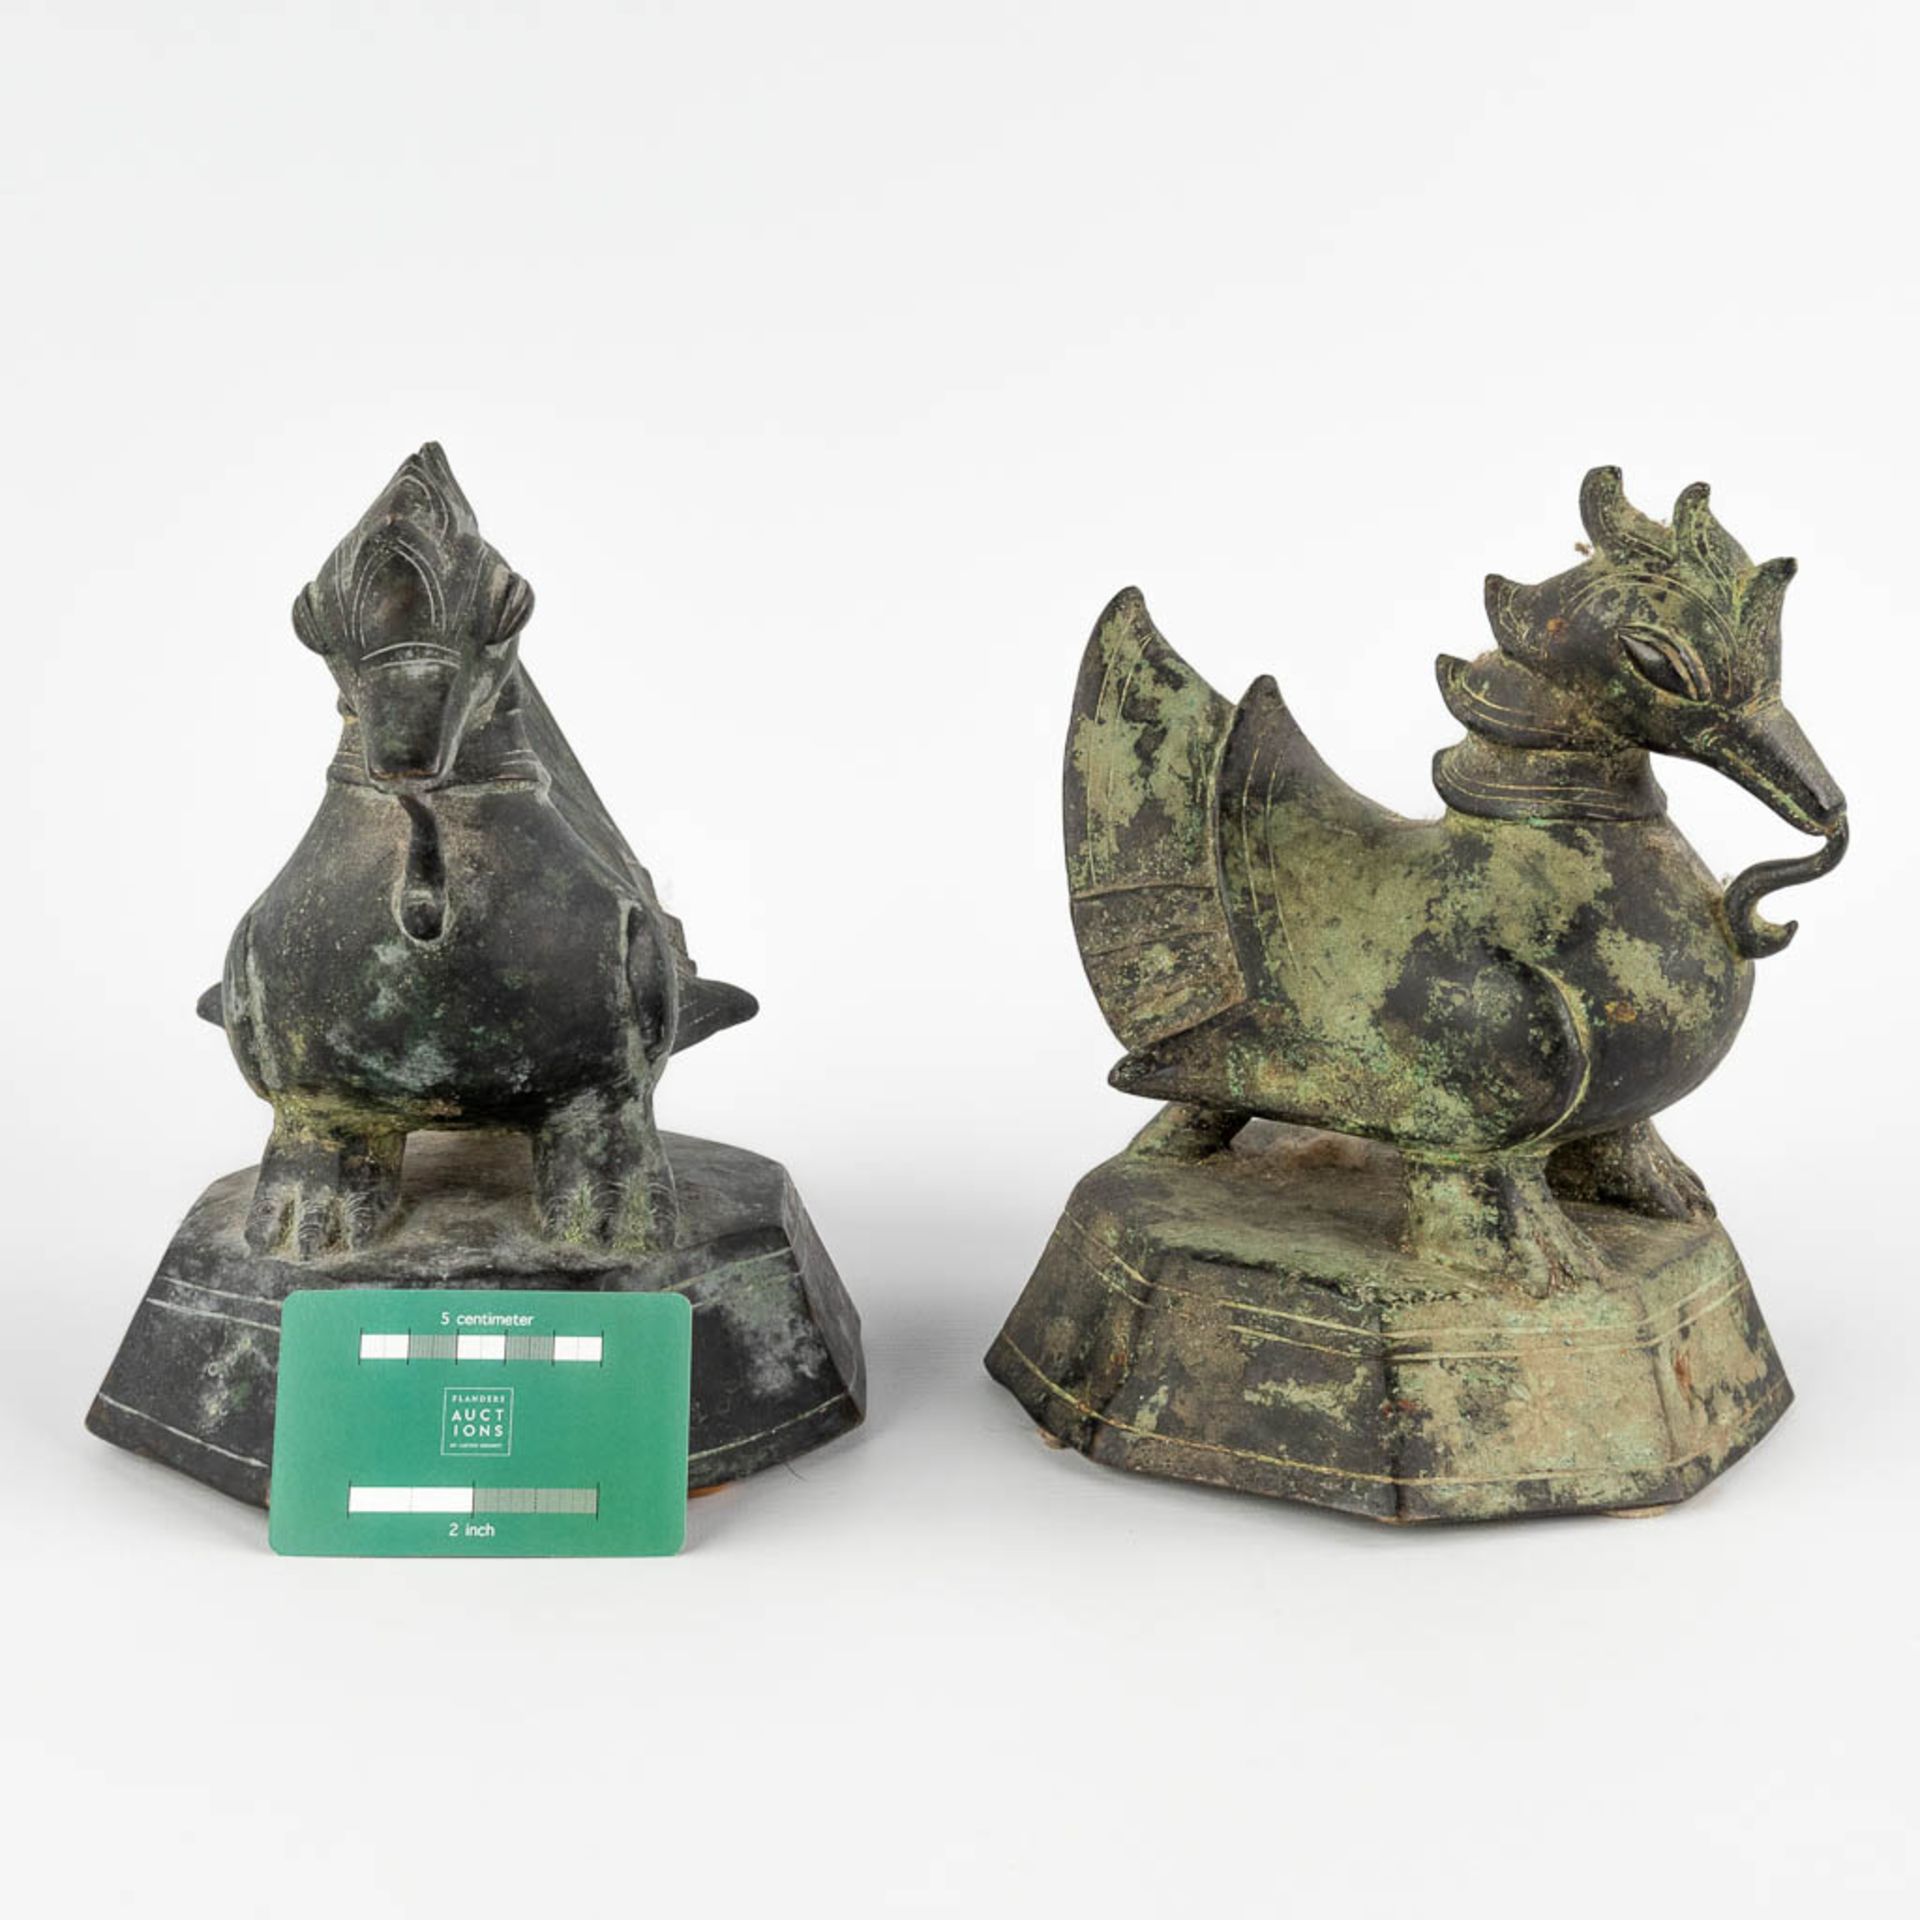 A pair of Oriental figurines, decorated with mythological figurines. Bronze. (D:17 x W:18 x H:22 cm) - Image 2 of 10